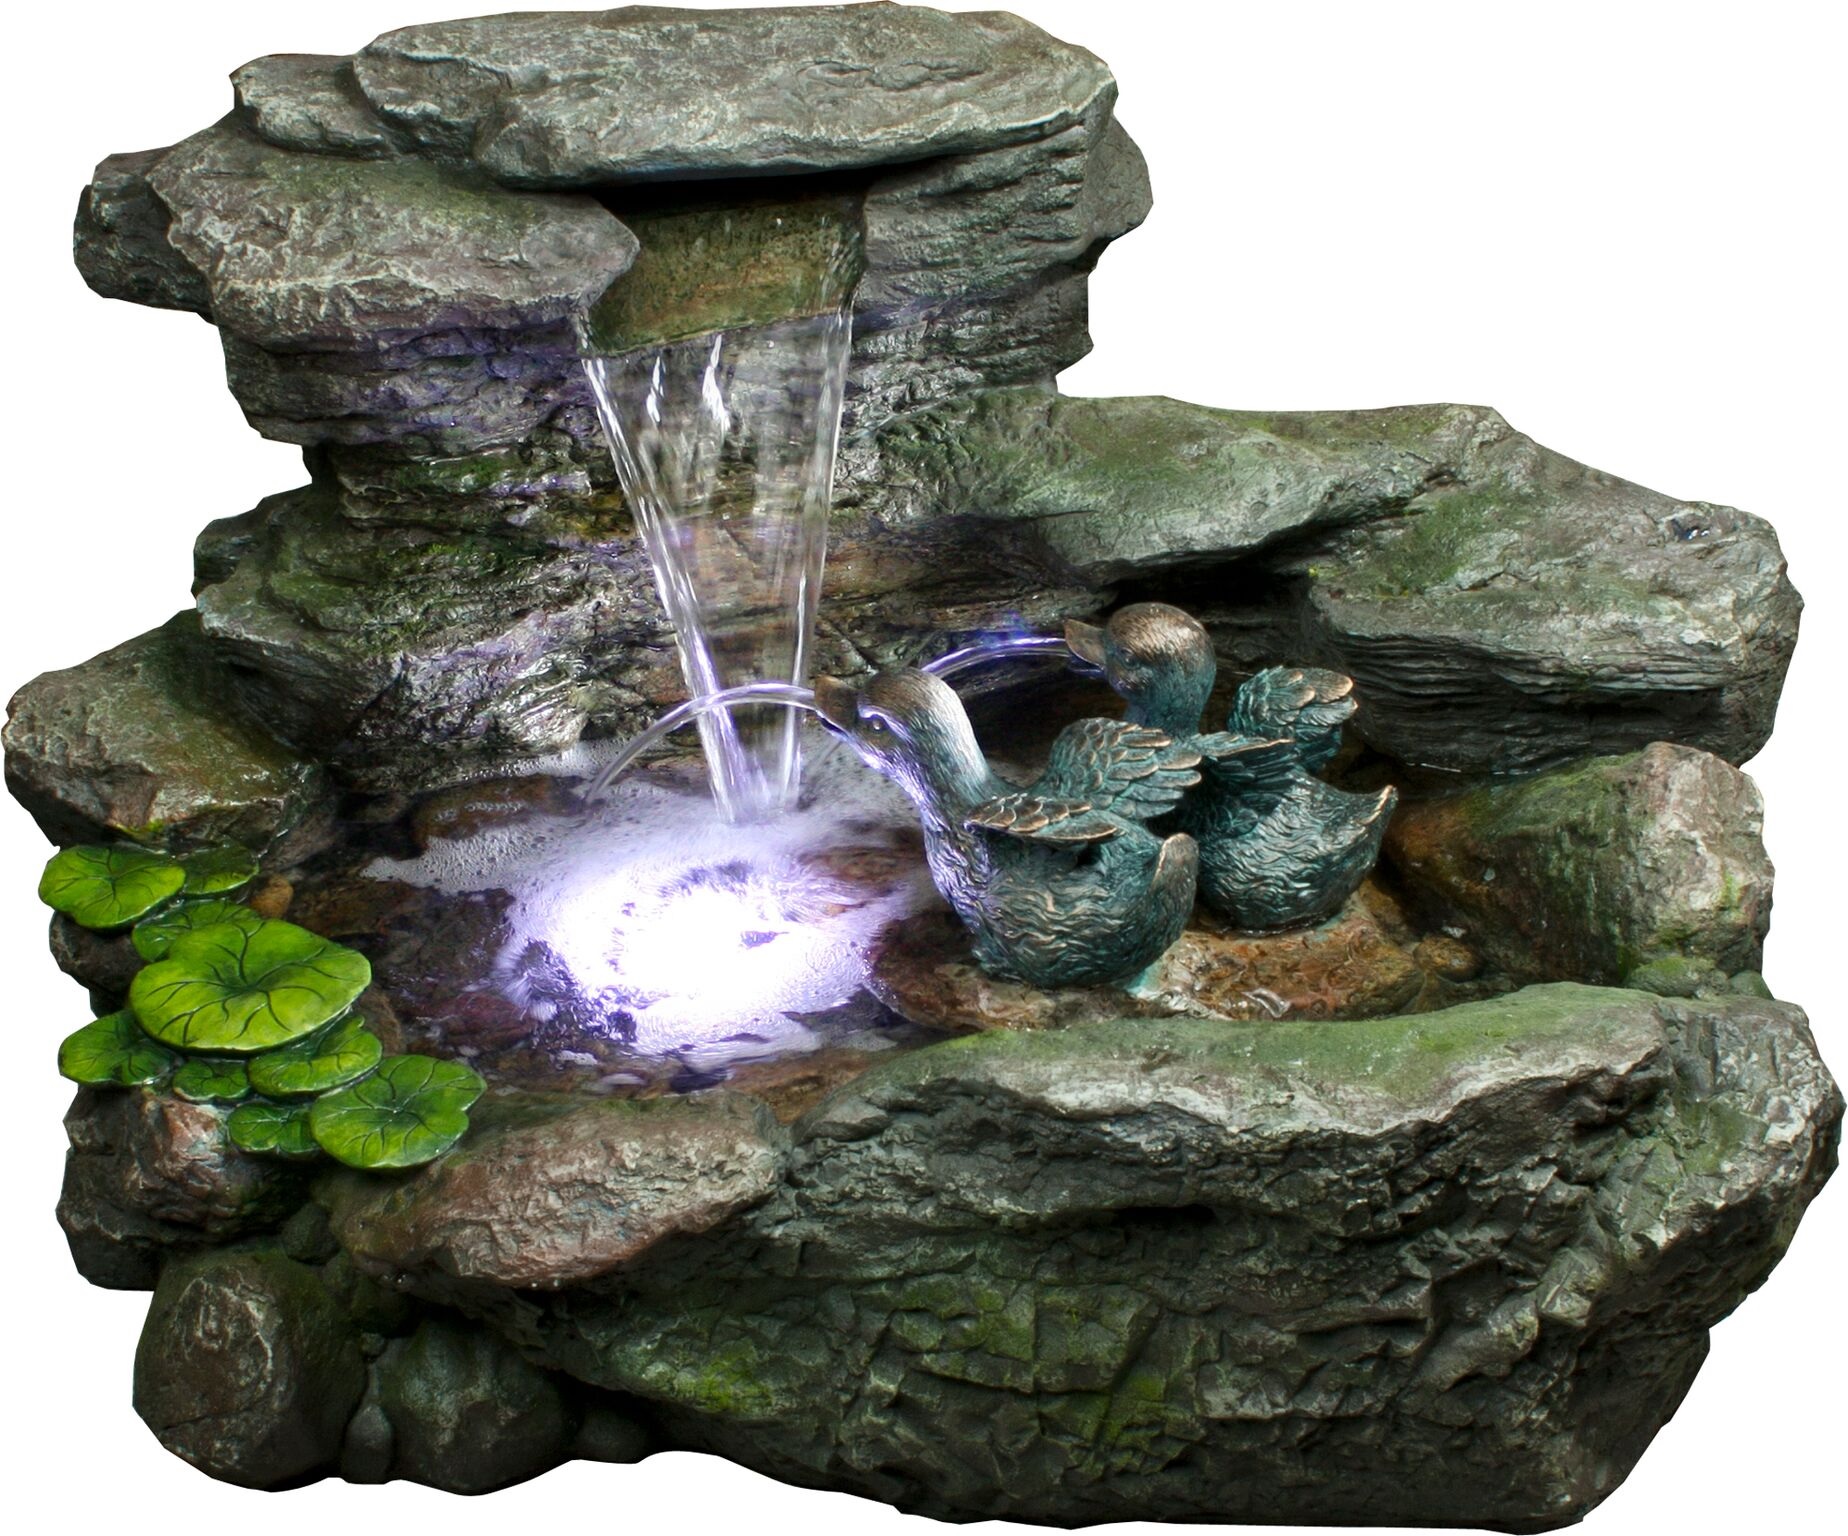 Outdoor Living and Style 29.15" Gainesville Envirostone Outdoor Fountain with Swimming Ducklings